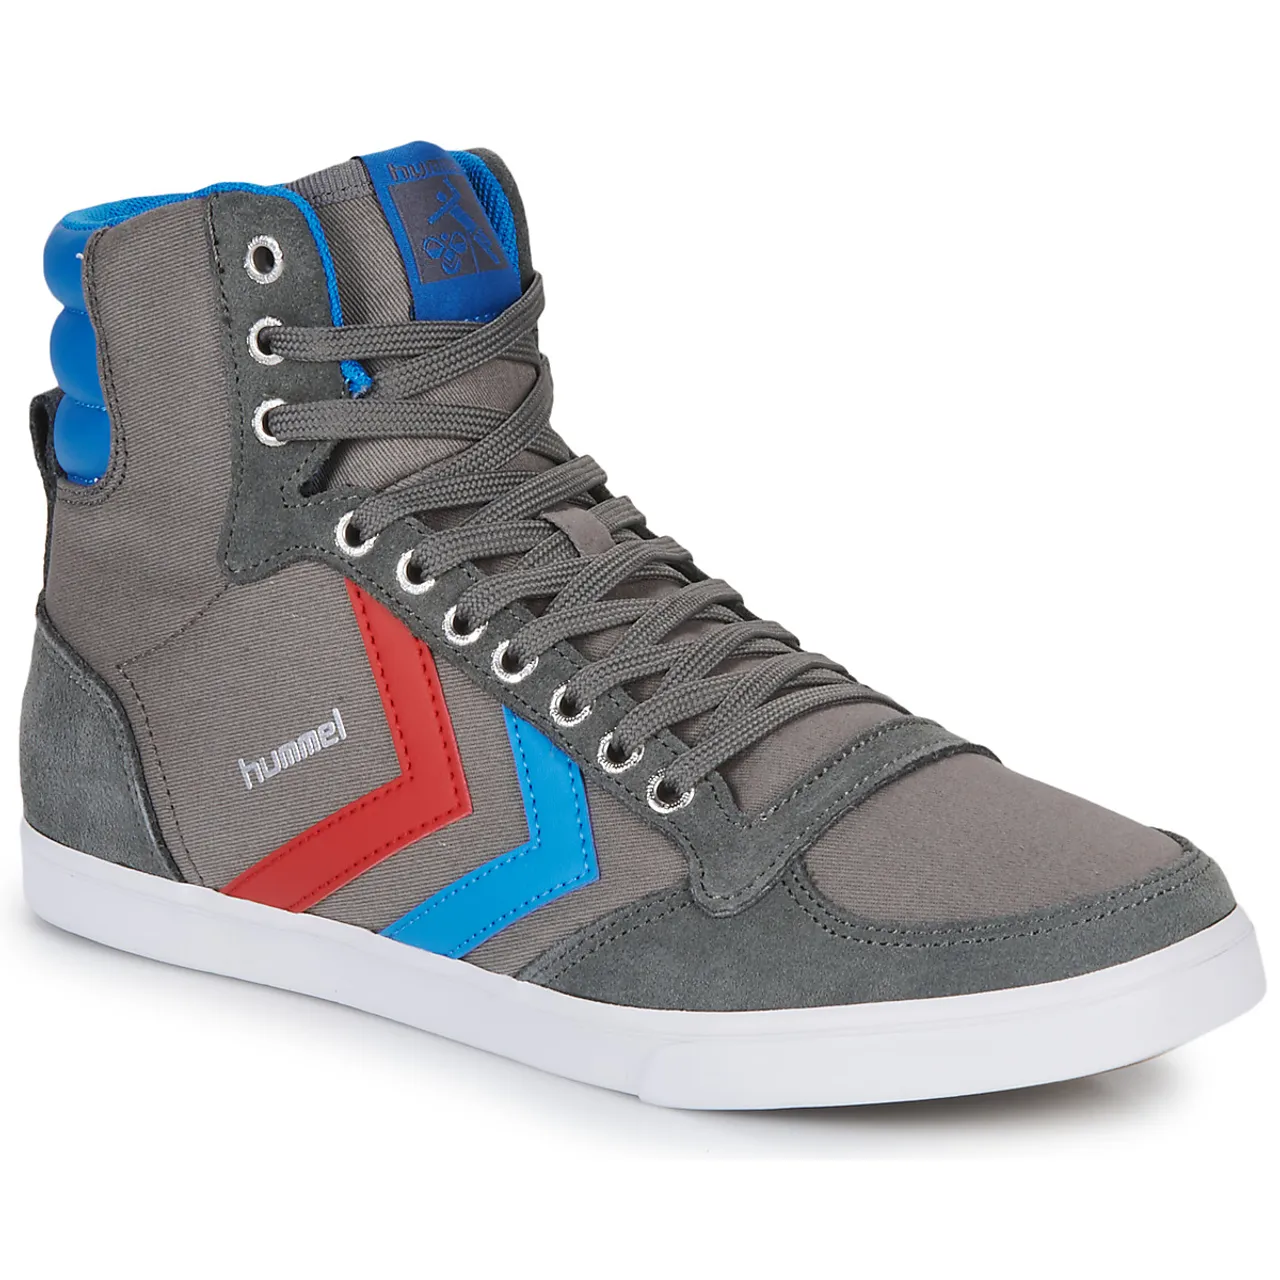 hummel  SLIMMER STADIL HIGH  men's Shoes (High-top Trainers) in Grey